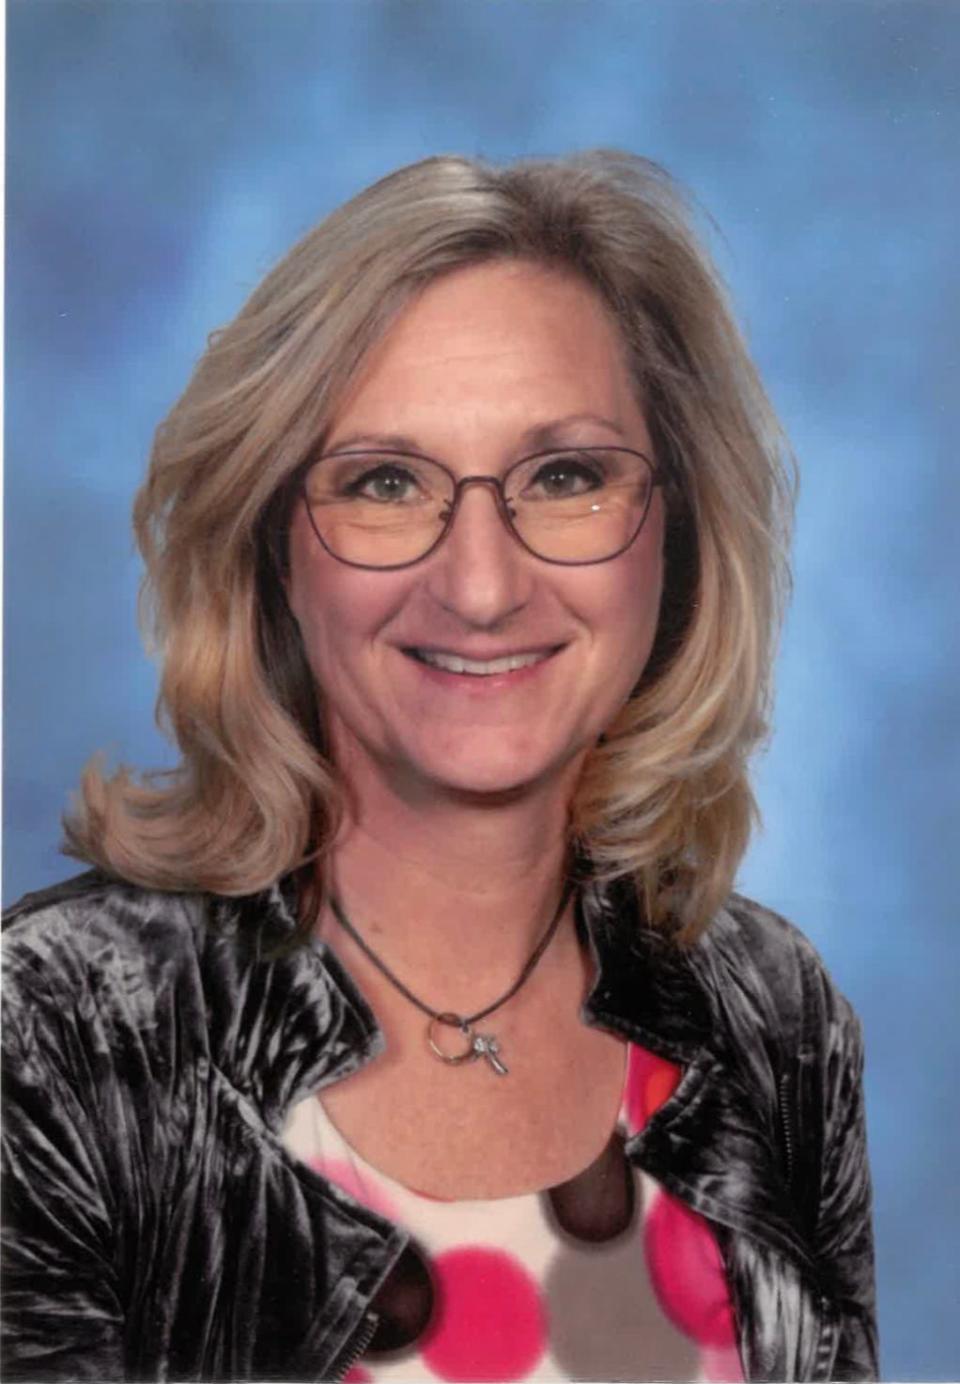 Jennifer Senkmajer has been selected as the Michigan 2023-24 Region 5 Teacher of the Year. She said its more of an advocacy position rather than an award.